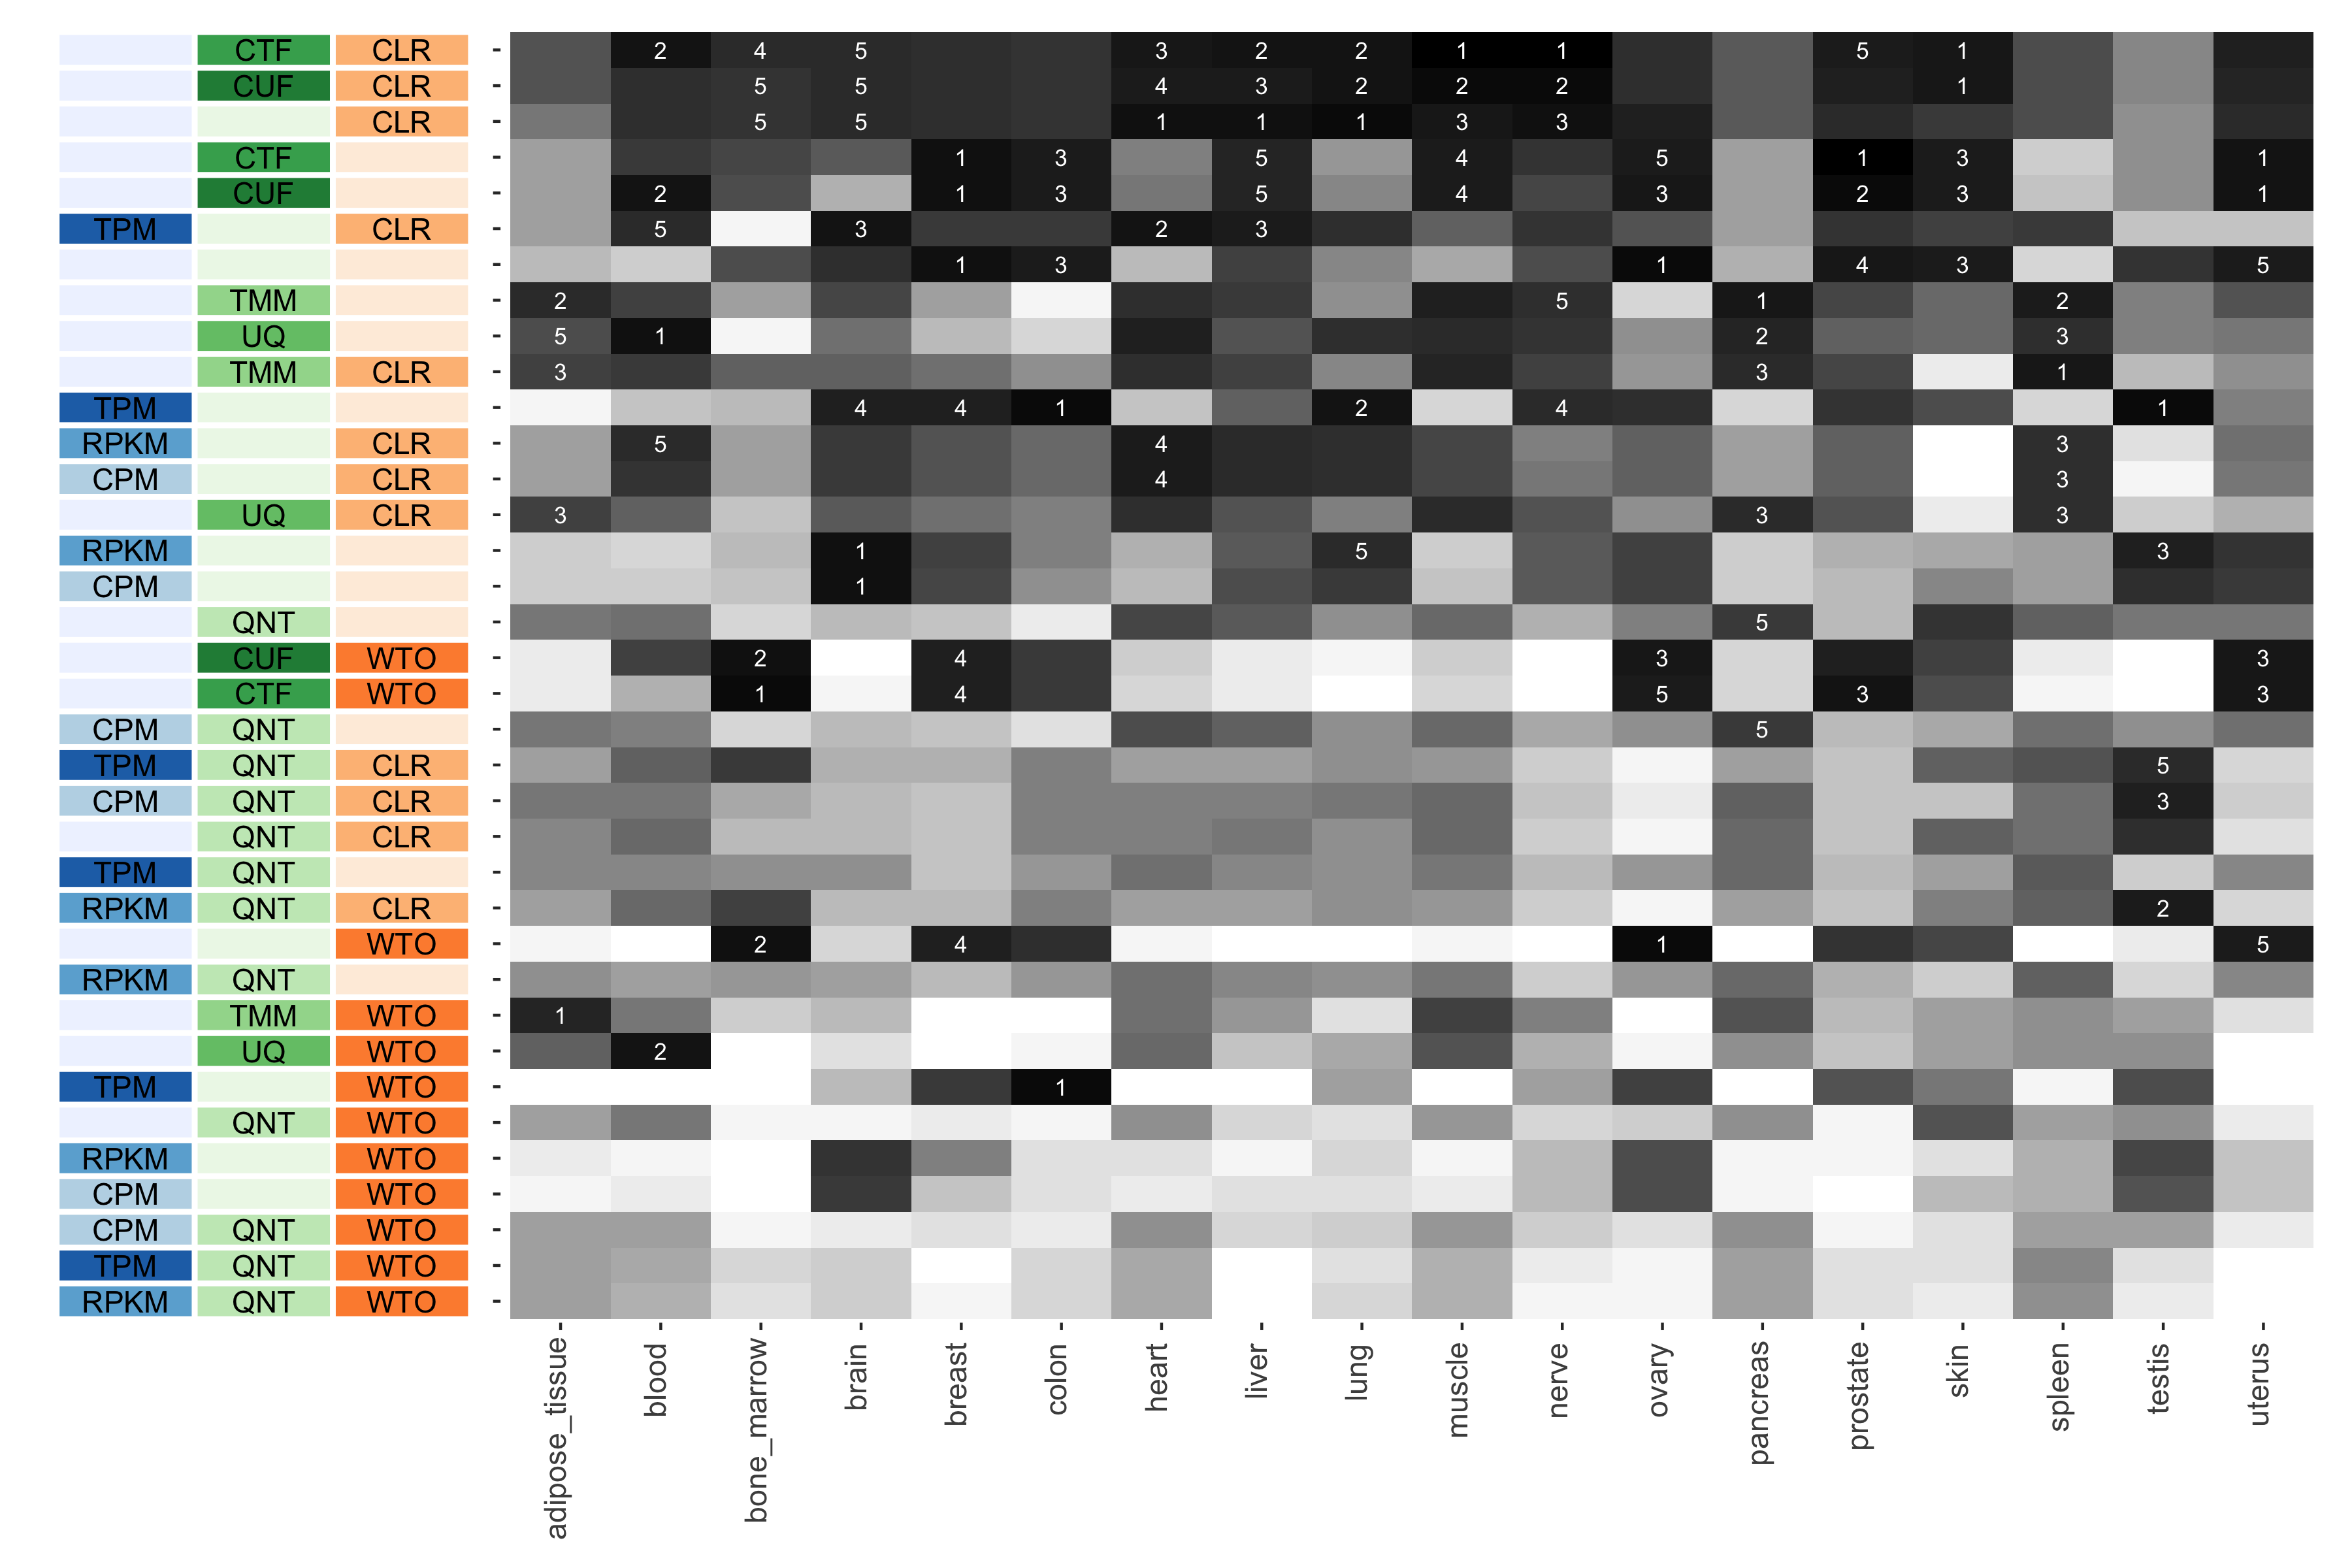 The heatmap shows the number of times (cell color) each workflow (row) outperforms other workflows in different tissues (columns), when the resulting coexpression networks are evaluated based on the tissue-aware gold standard. The darkest colors indicate workflows that are significantly better than the most other workflows. In addition, the top 5 workflows in each column are marked with their rank, with ties given minimum rank.